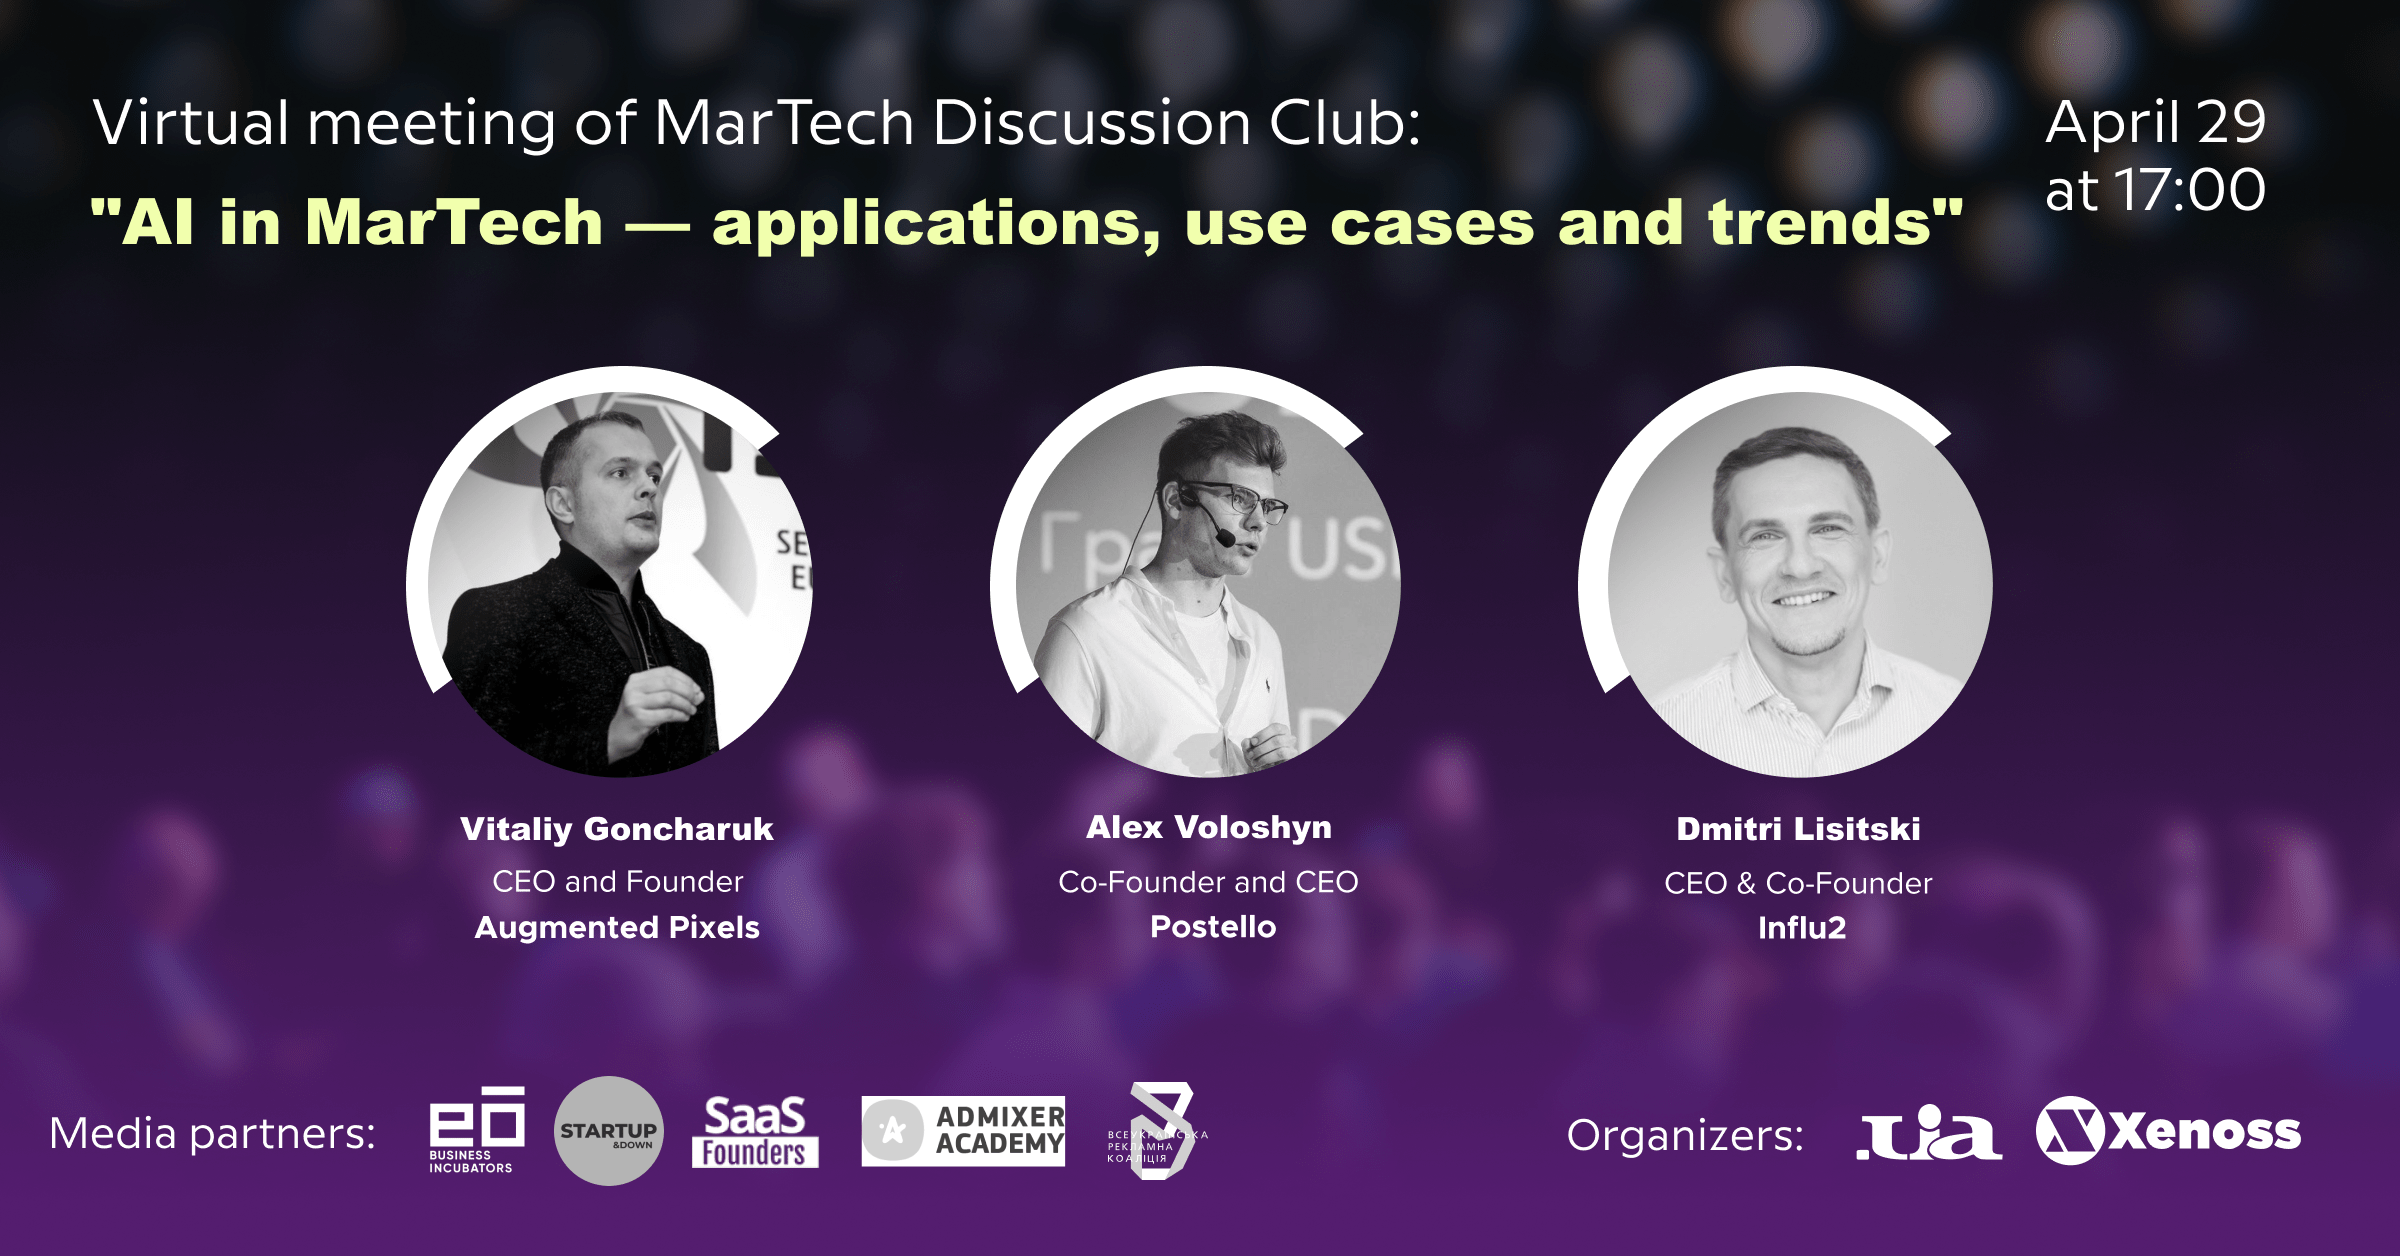 Xenoss’ MarTech Discussion Club Meets to Talk about AI in MarTech